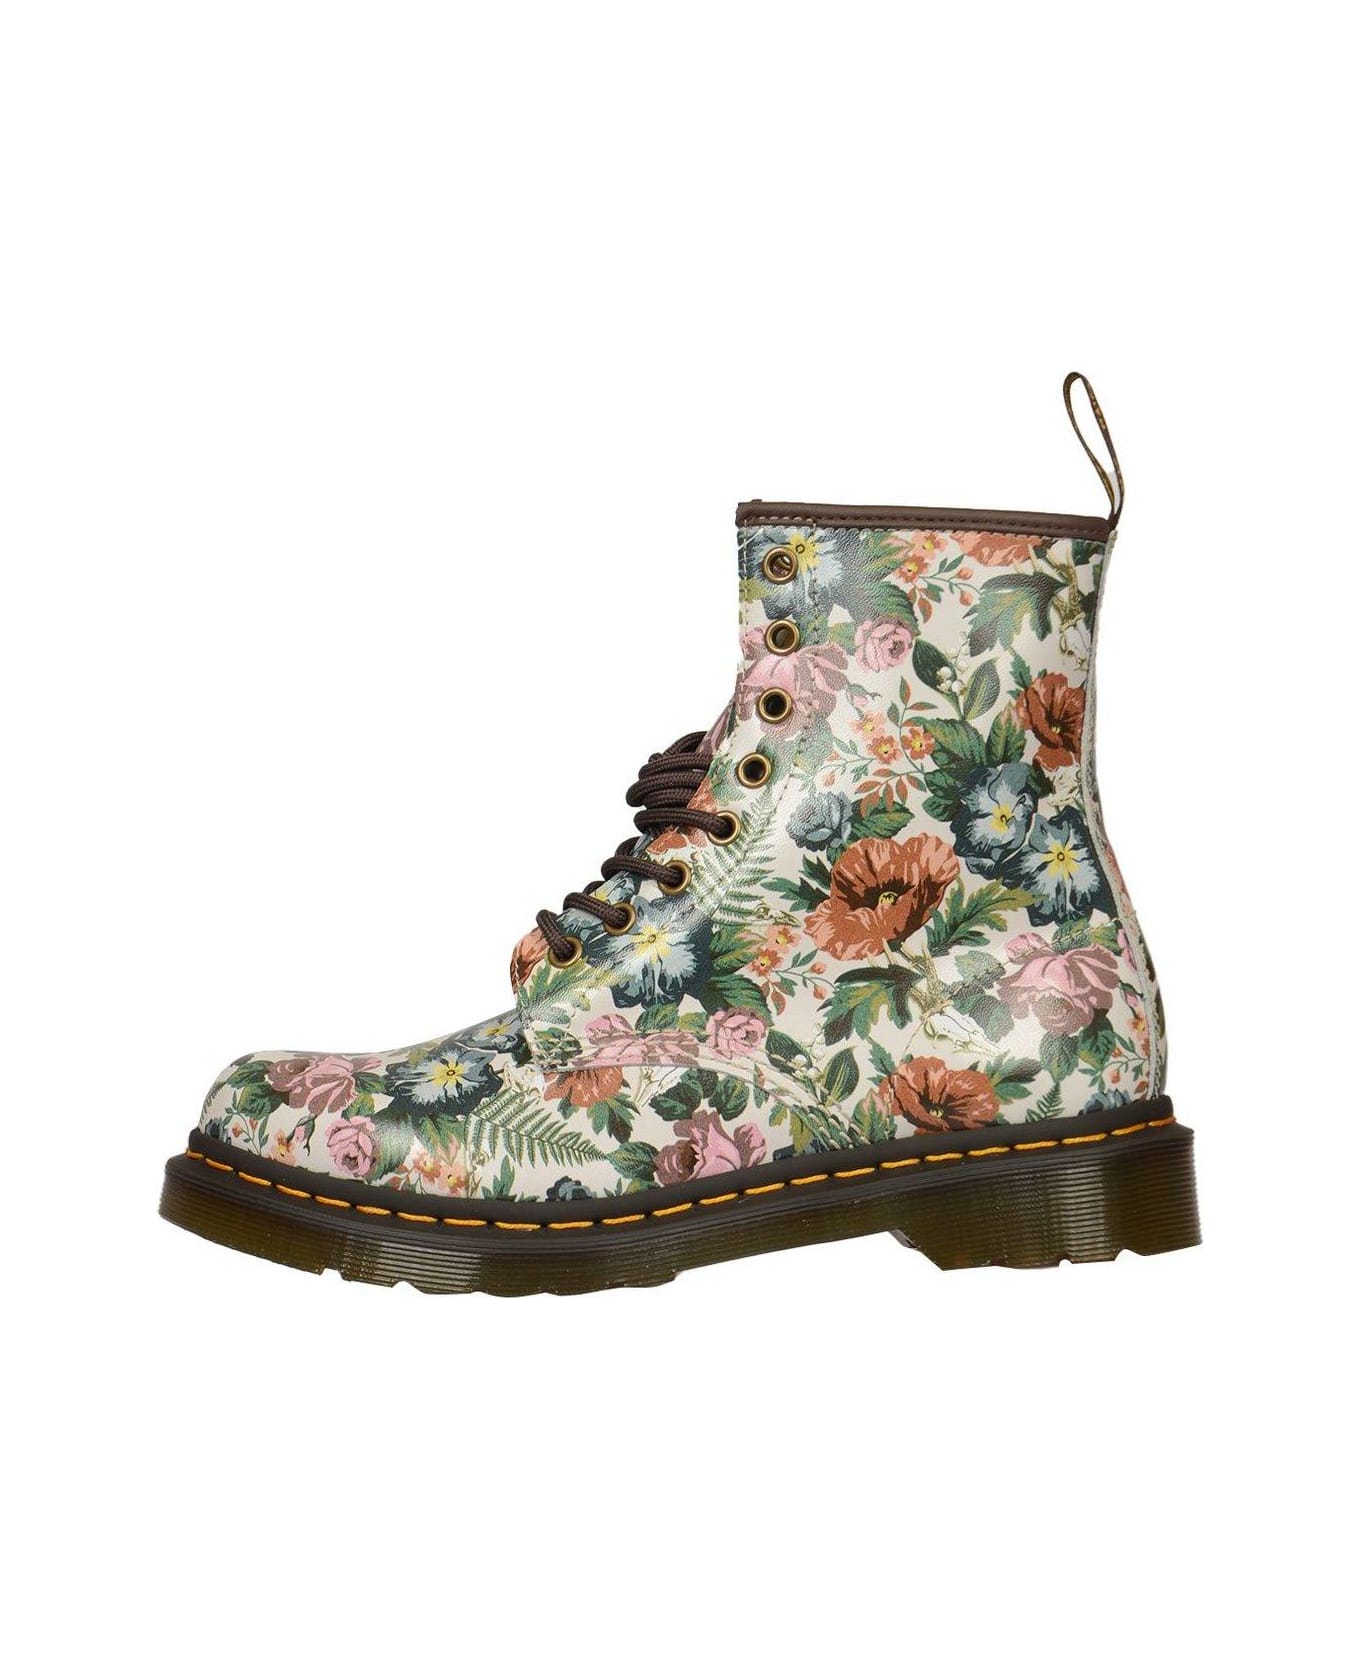 Dr. Martens Lace-up Boots - ENGLISH	GARDEN PRINT BACKHAND シューズ